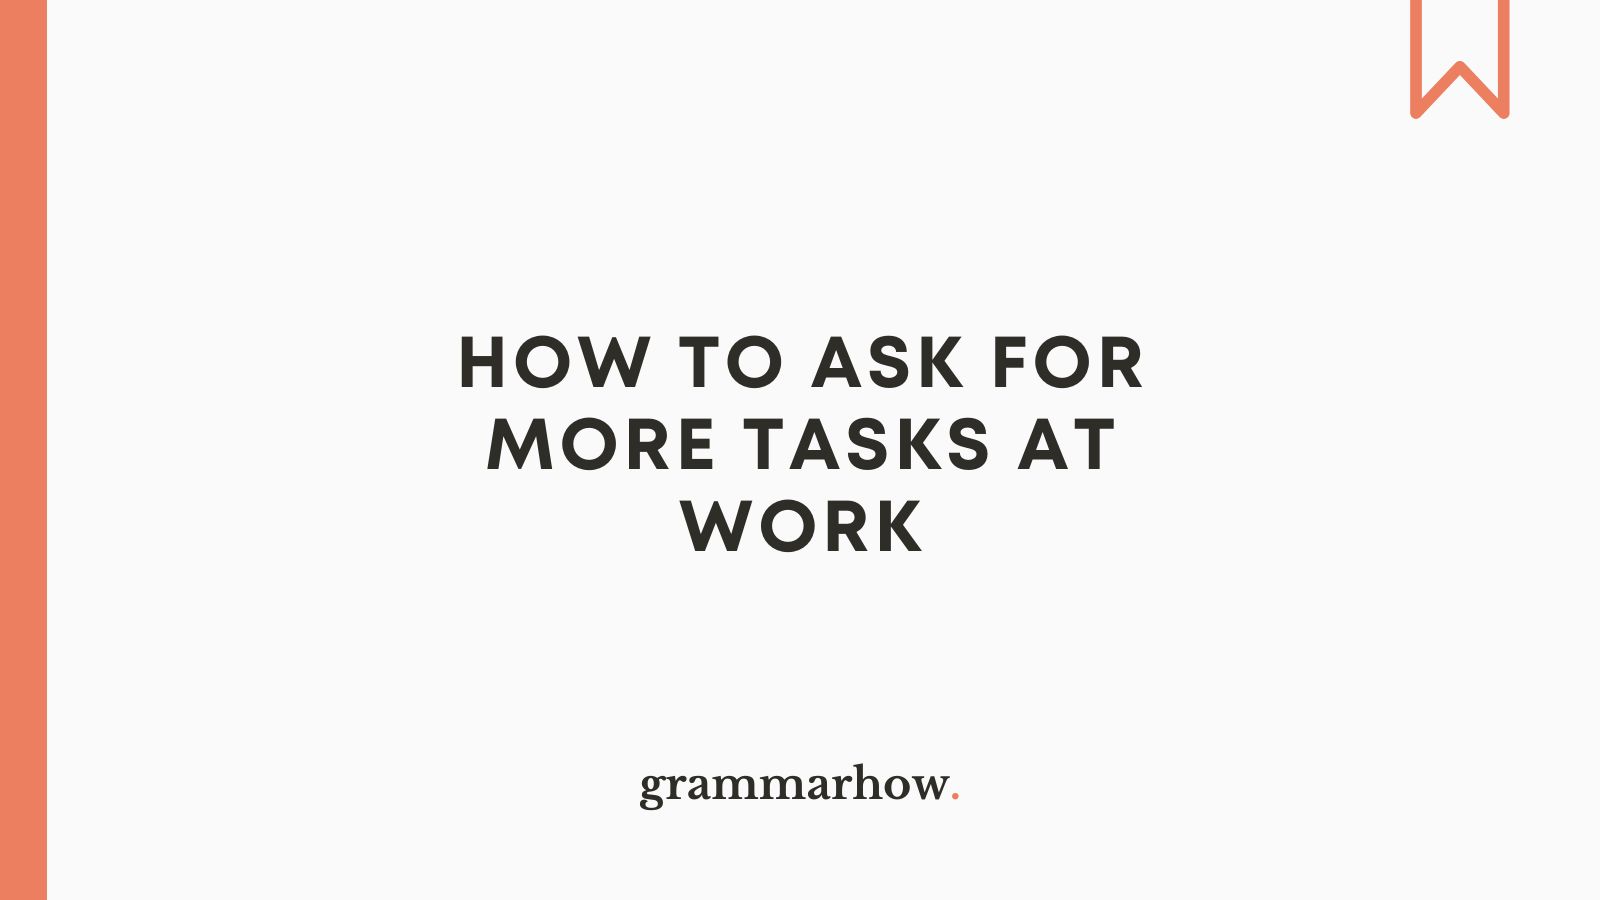 How To Ask For More Tasks At Work Email Samples 3530